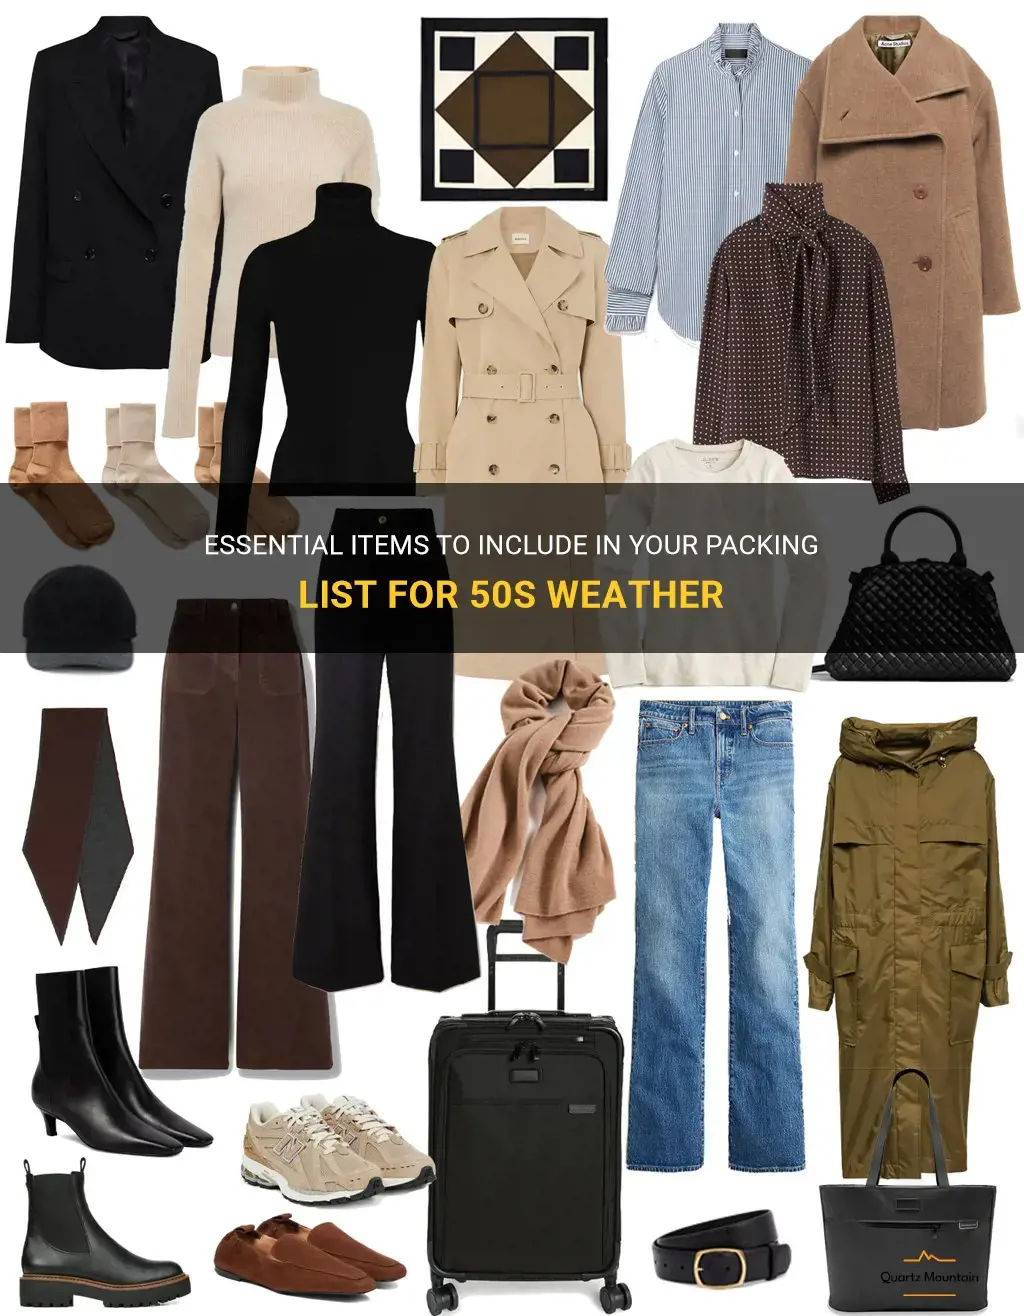 what to pack for weather in the 50s